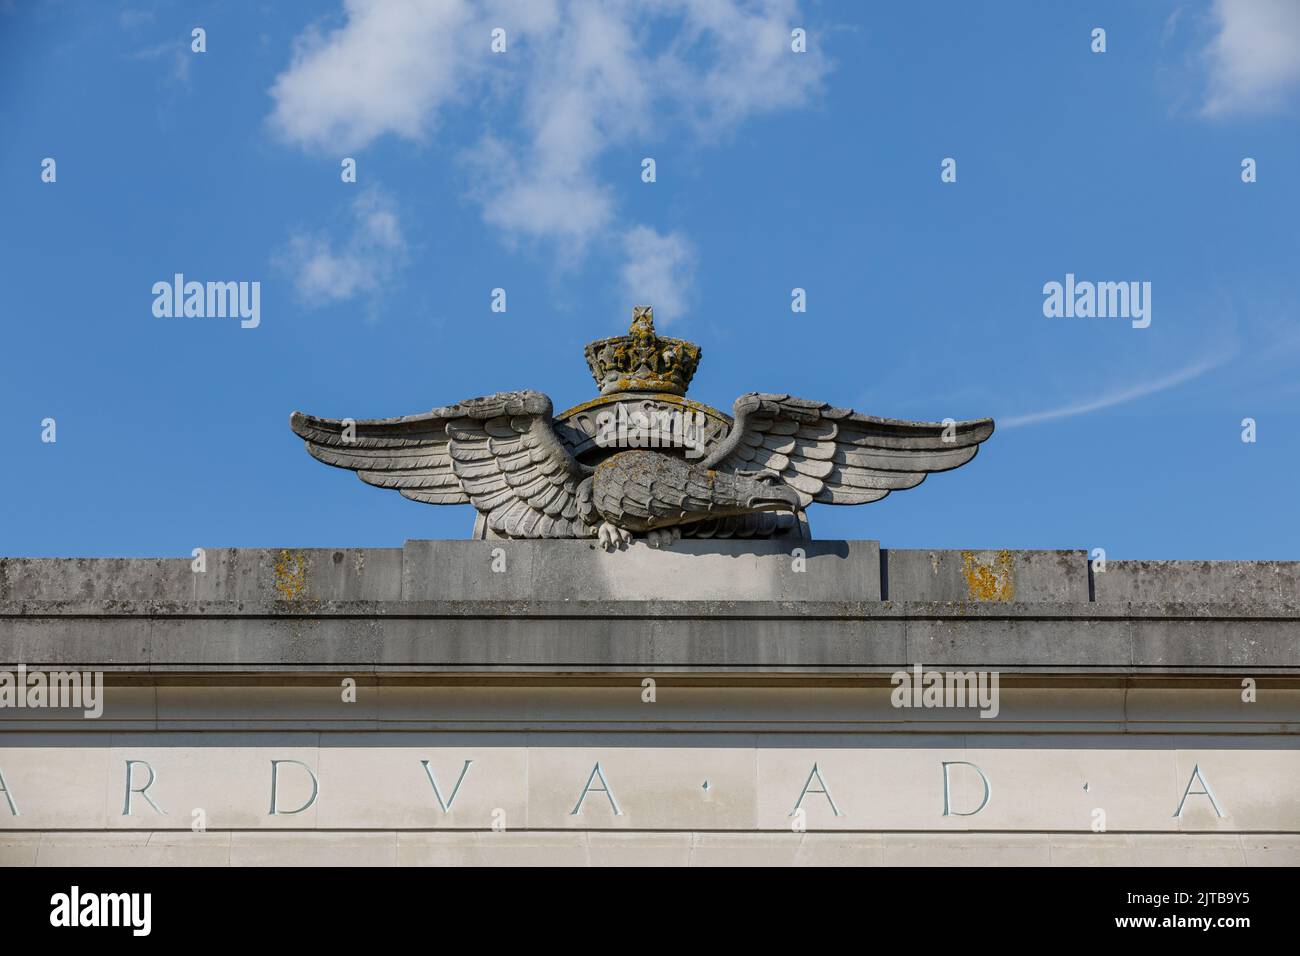 The Royal air Force eagle in stone. RAF crest Stock Photo